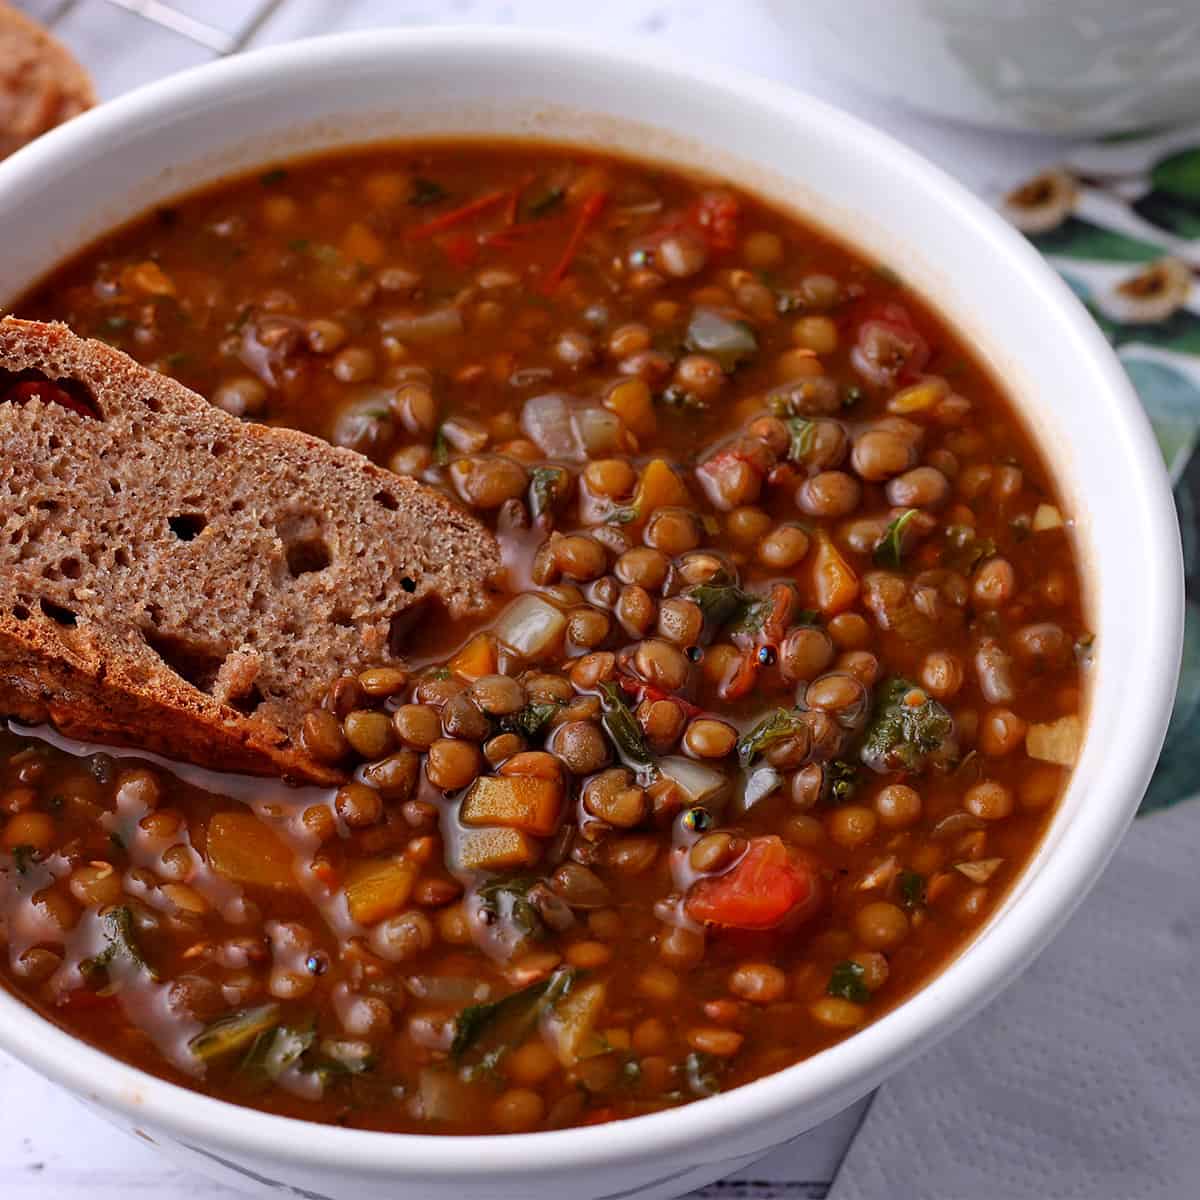 Wheat bread is dipped into vegan French Lentil soup.